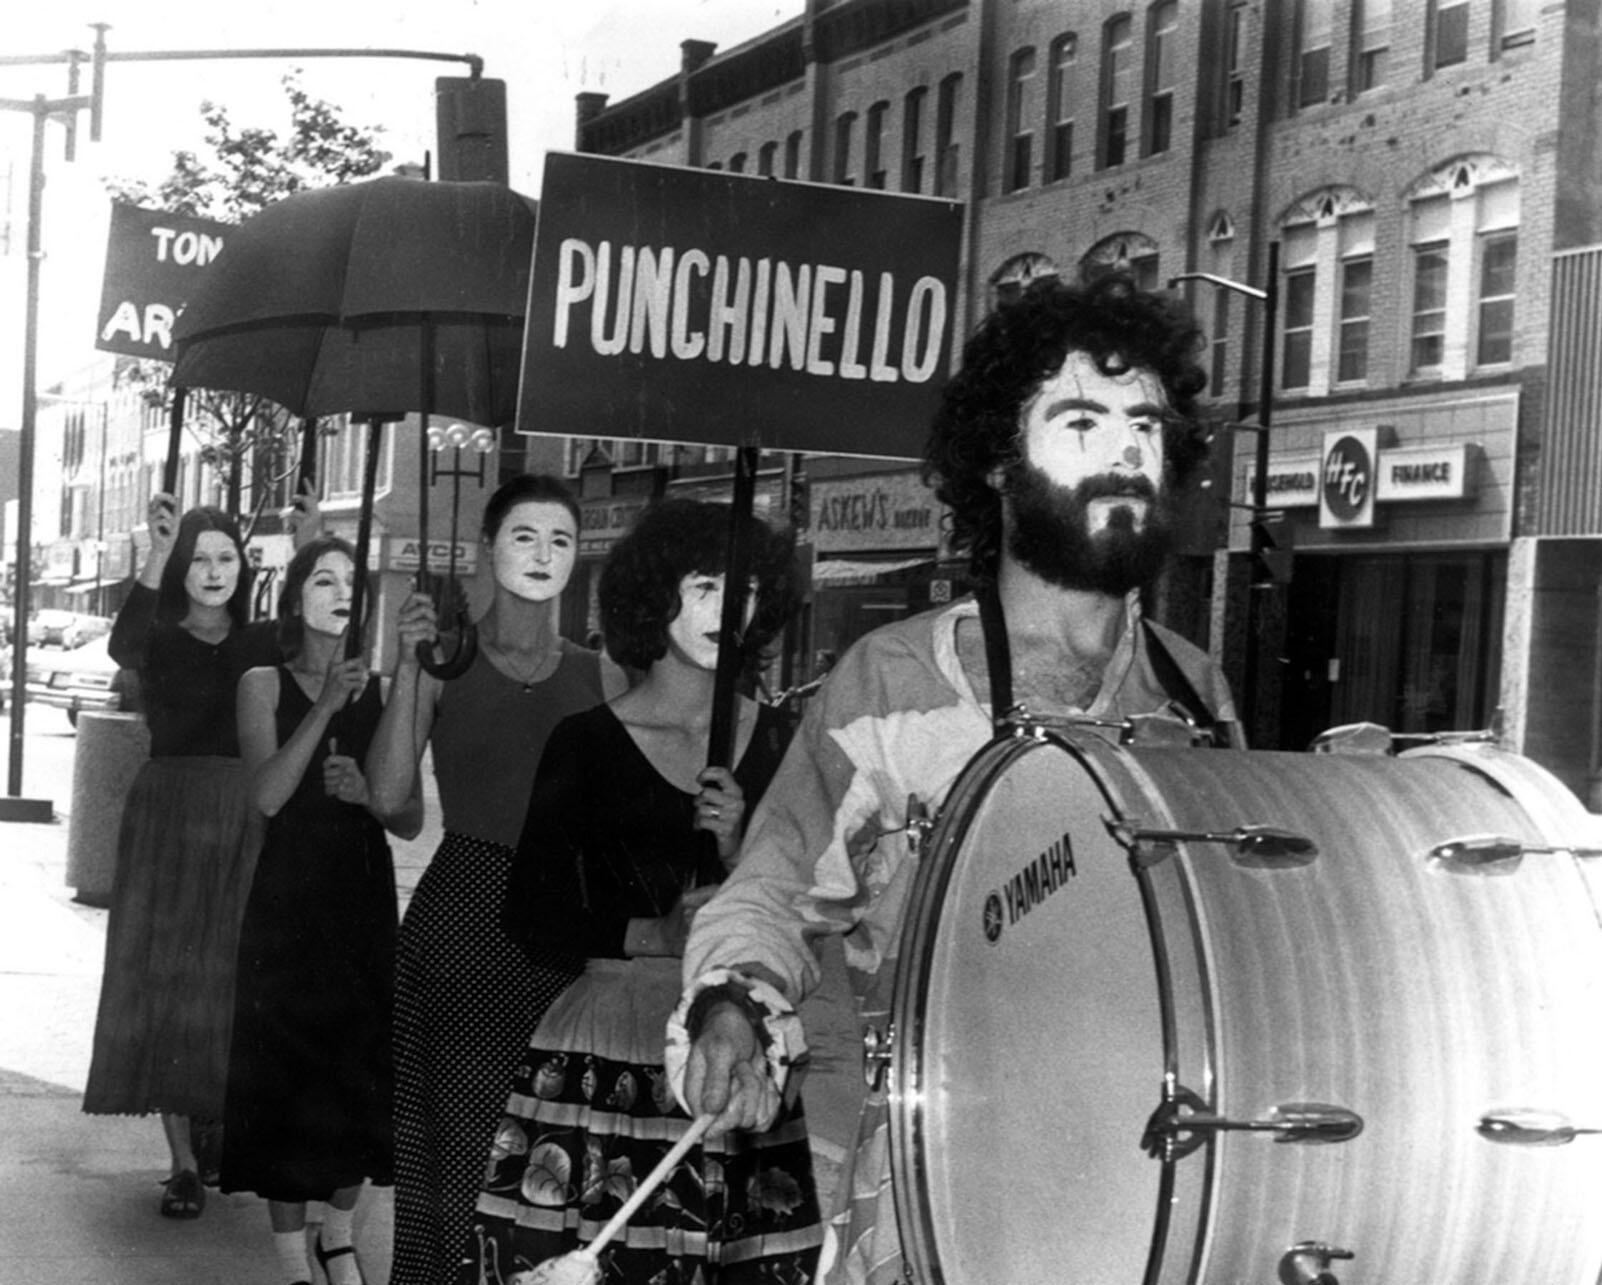 A traveling theater group walks in makeup behind a drum down a street in a small town. (Photo courtesy of Elgin County Archives.)